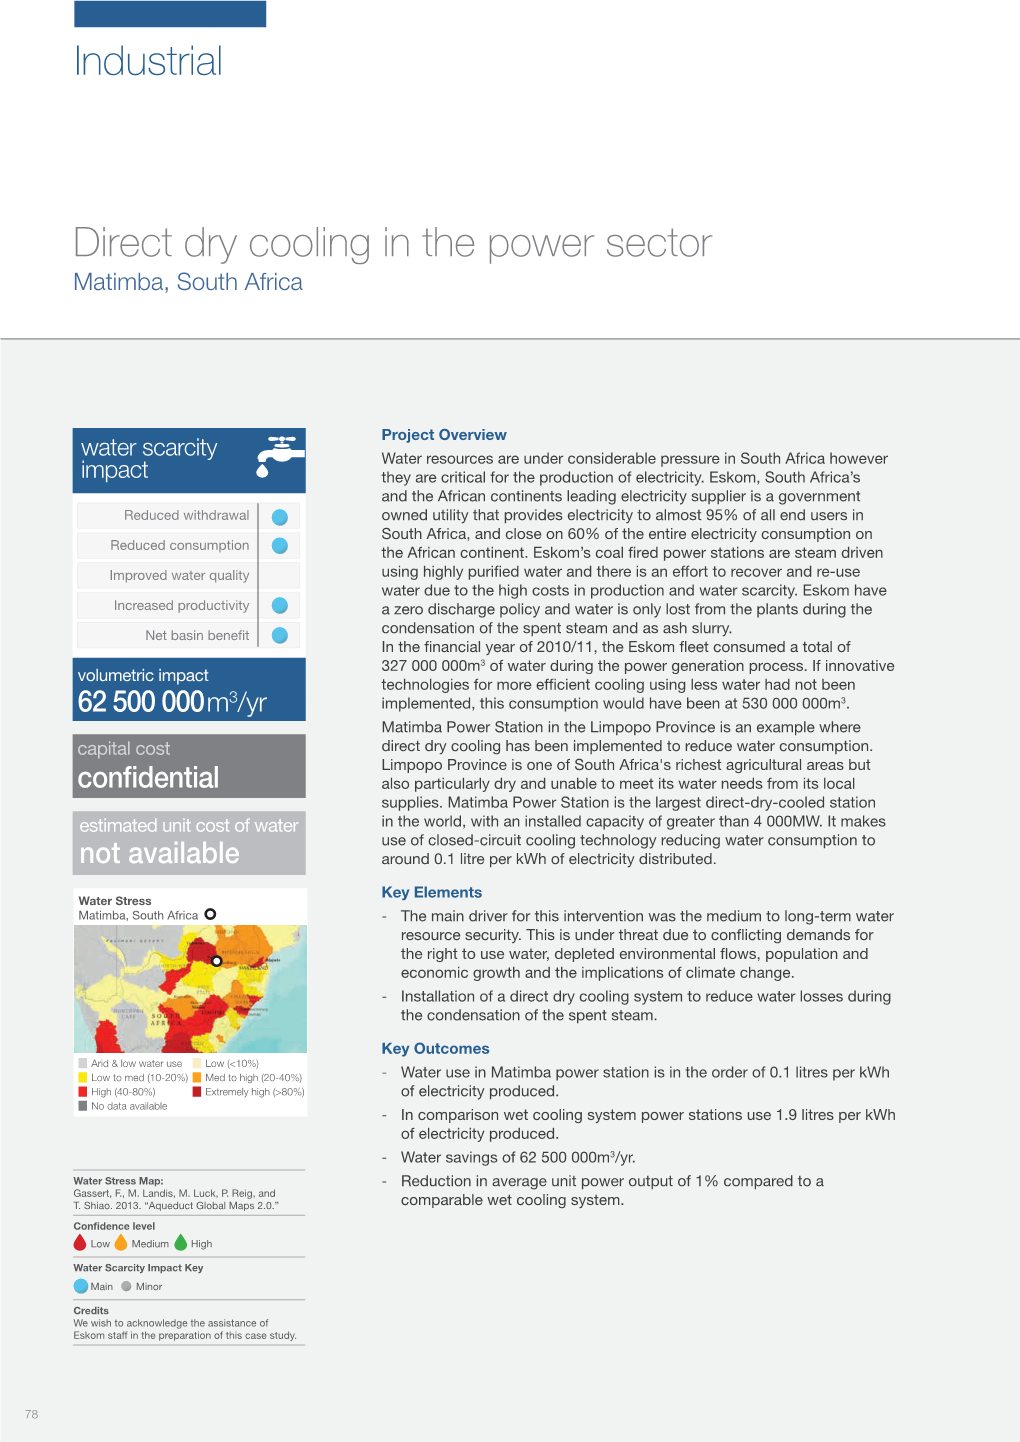 Industrial Direct Dry Cooling in the Power Sector